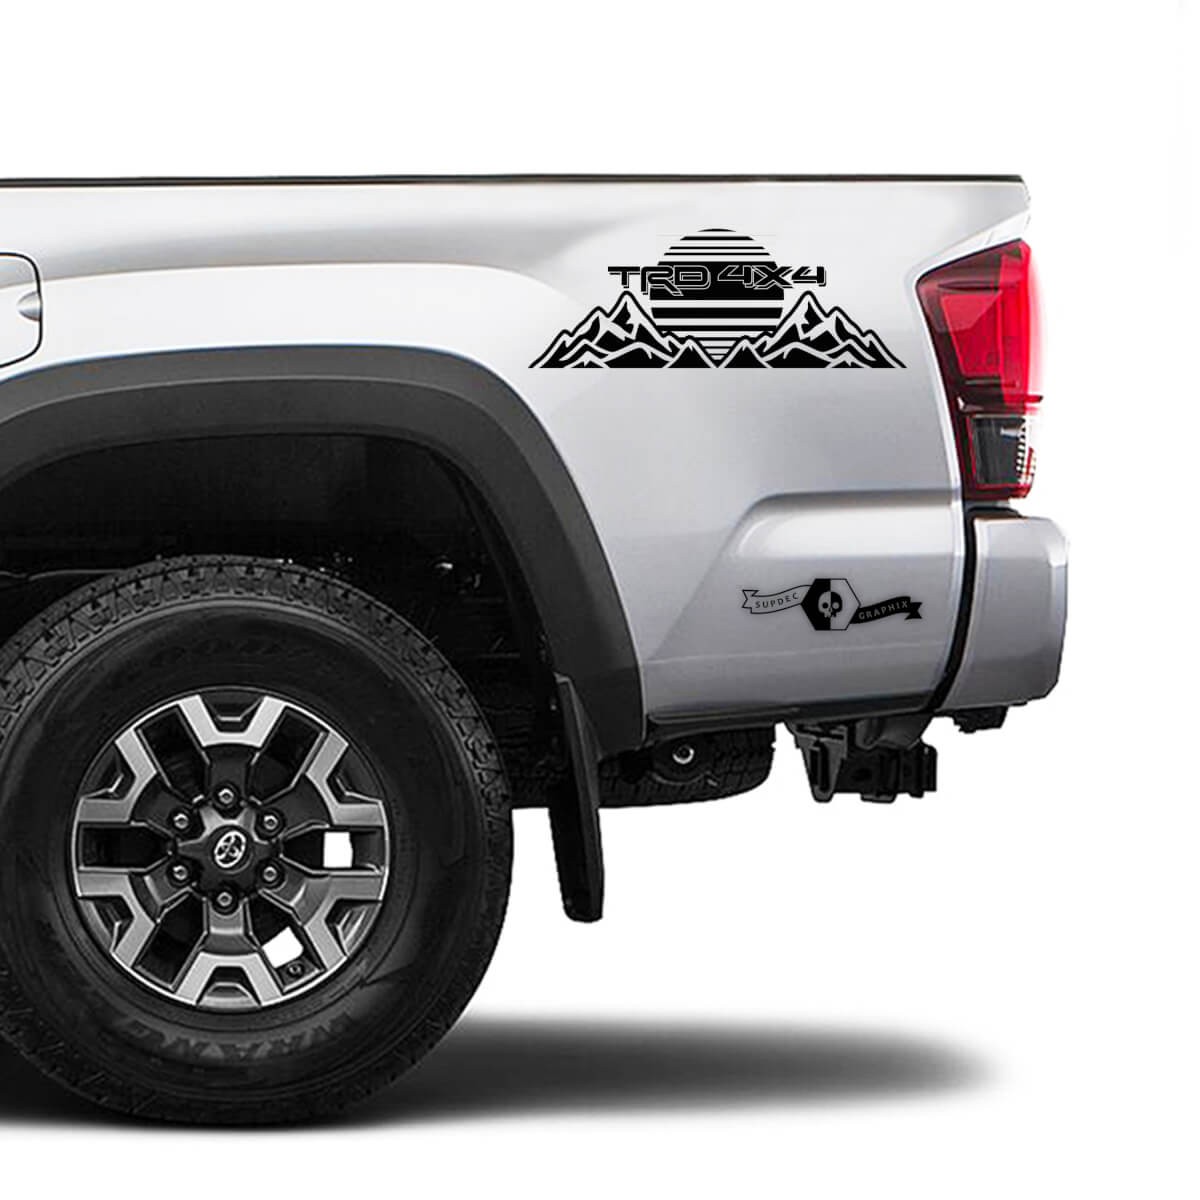 TRD 4x4 Off Road TOYOTA Mountains Sunrise Decals Stickers for Tacoma Tundra 4Runner Hilux side